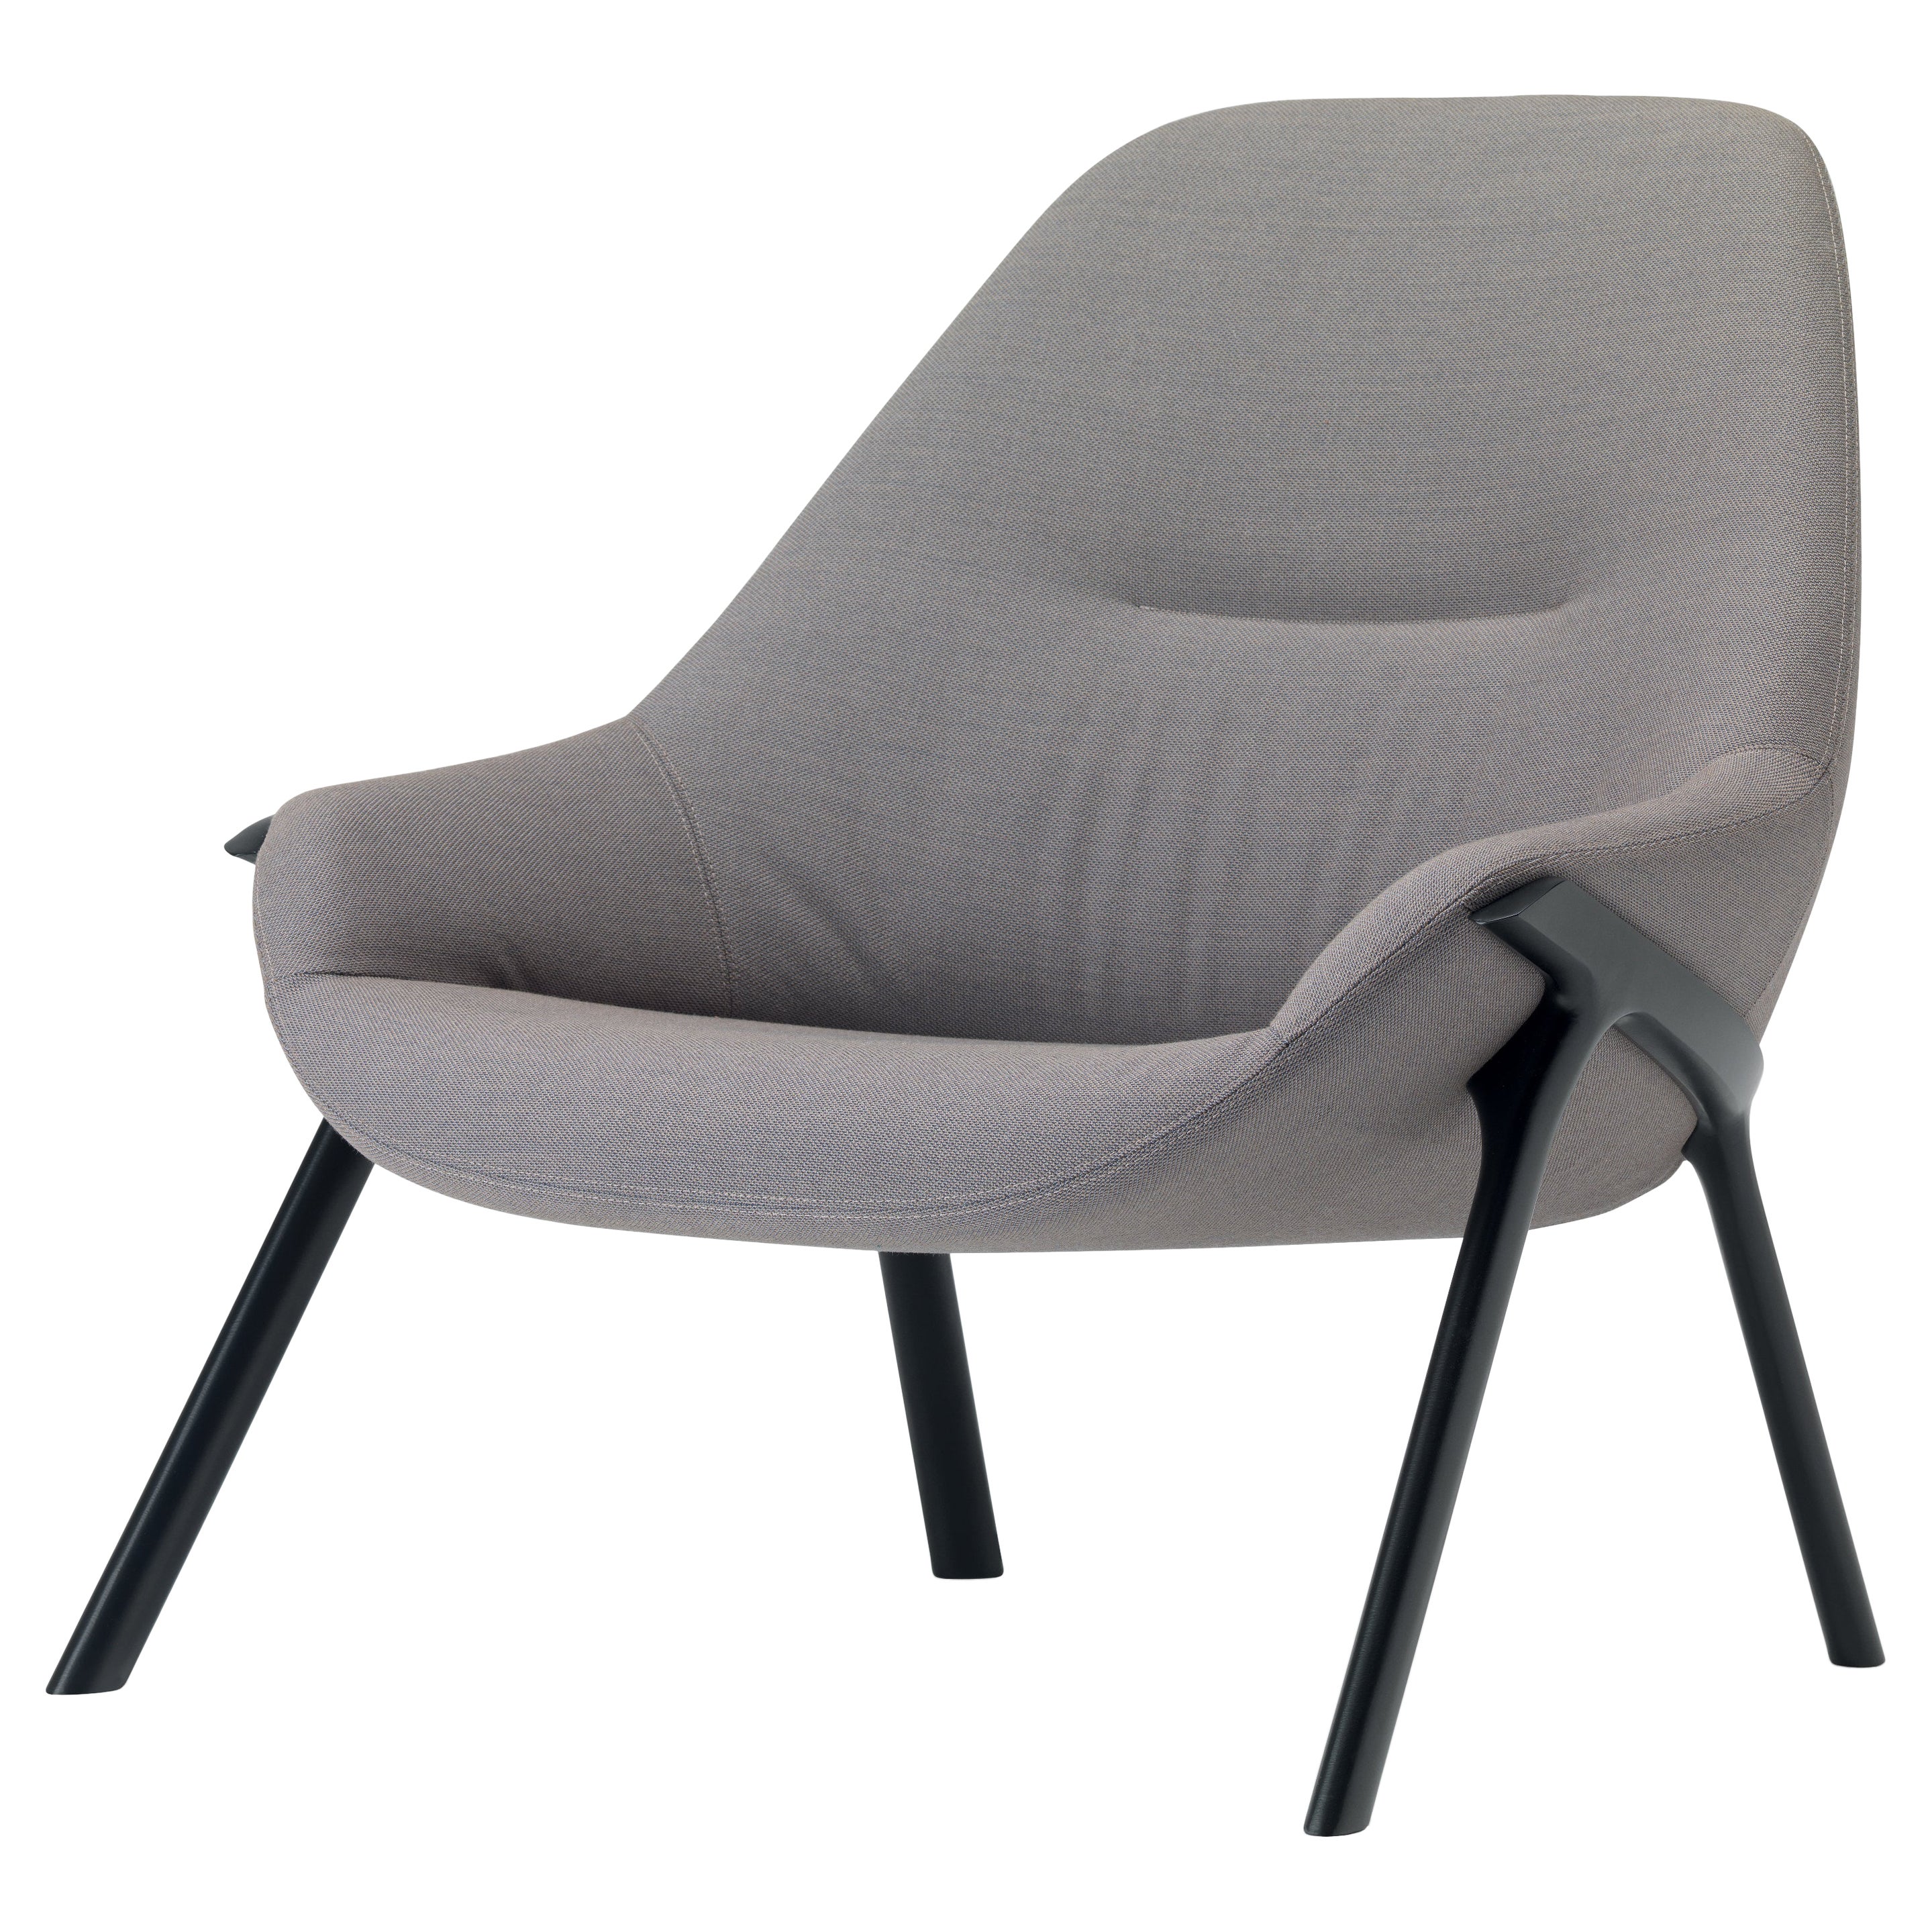 Alias 038 Gran Kobi Essentiel Armchair with Grey Seat and Black Lacquered Frame